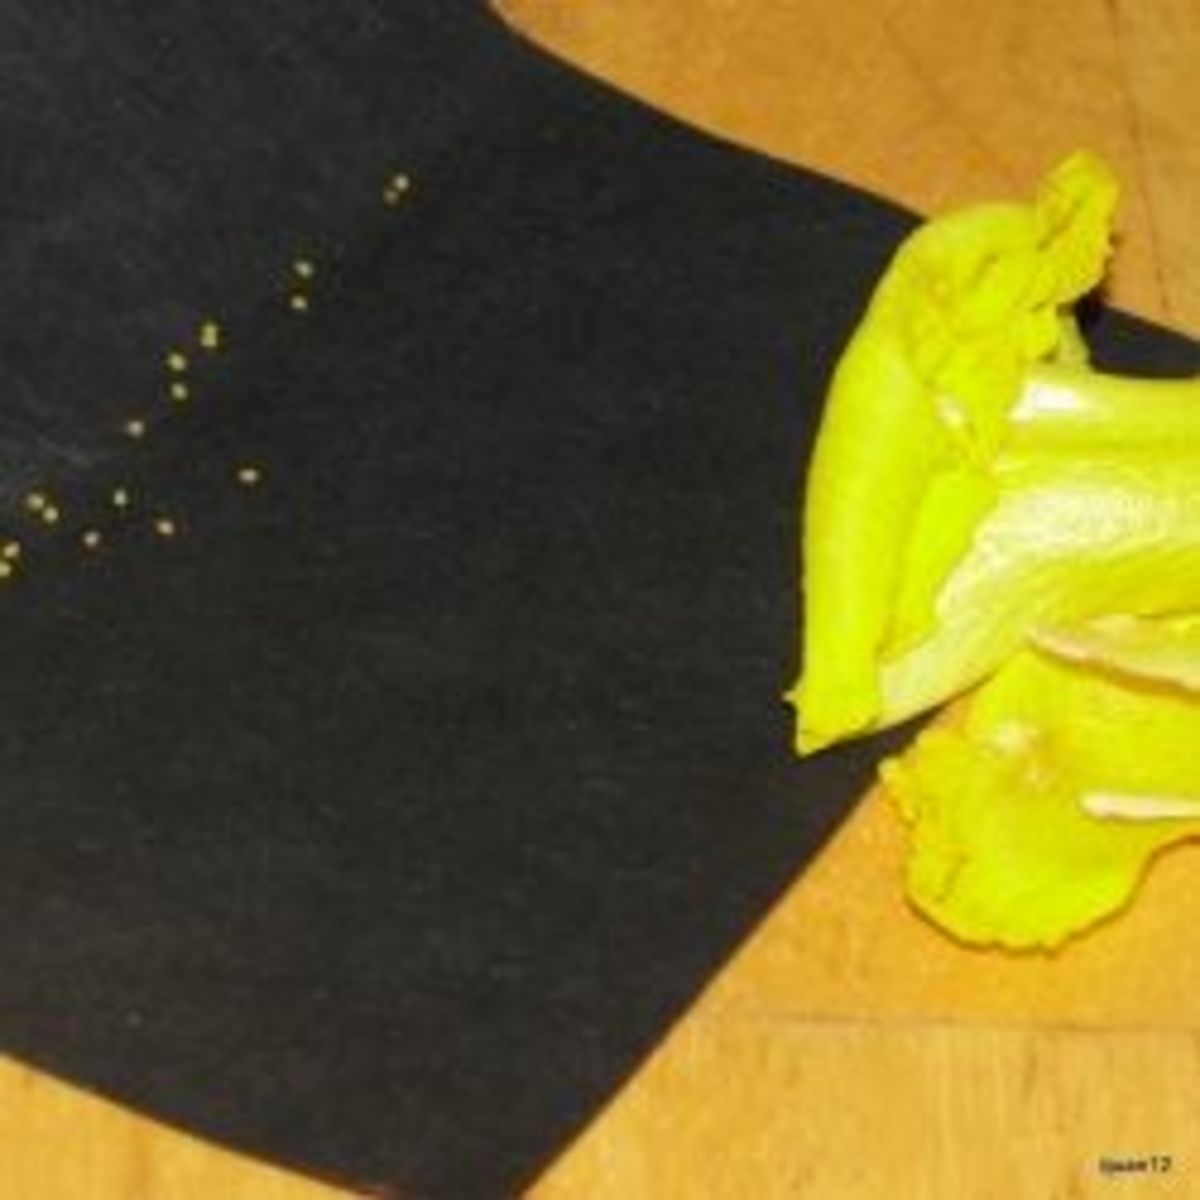 Dissecting a flower and discovering the pollen (on the black paper)